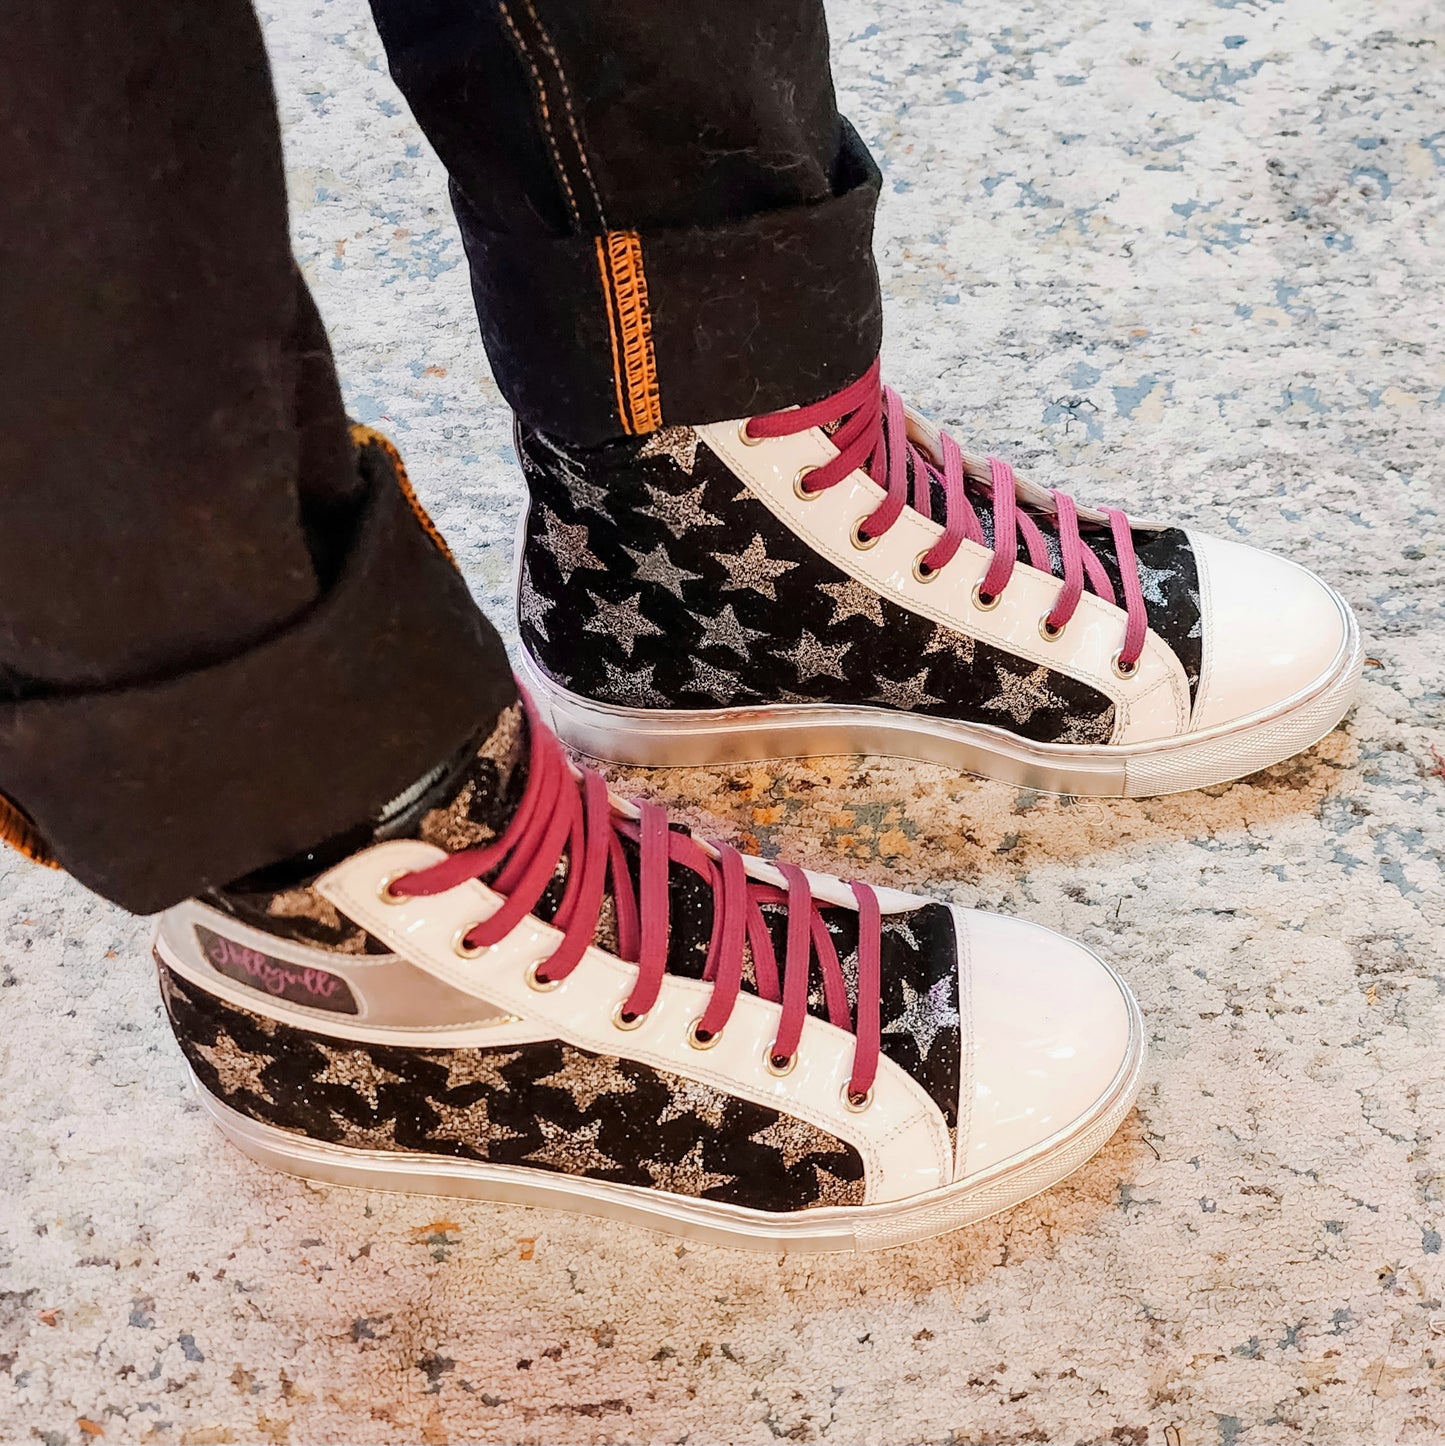 Hollyicious Classic High Top Sneakers by Hollyville